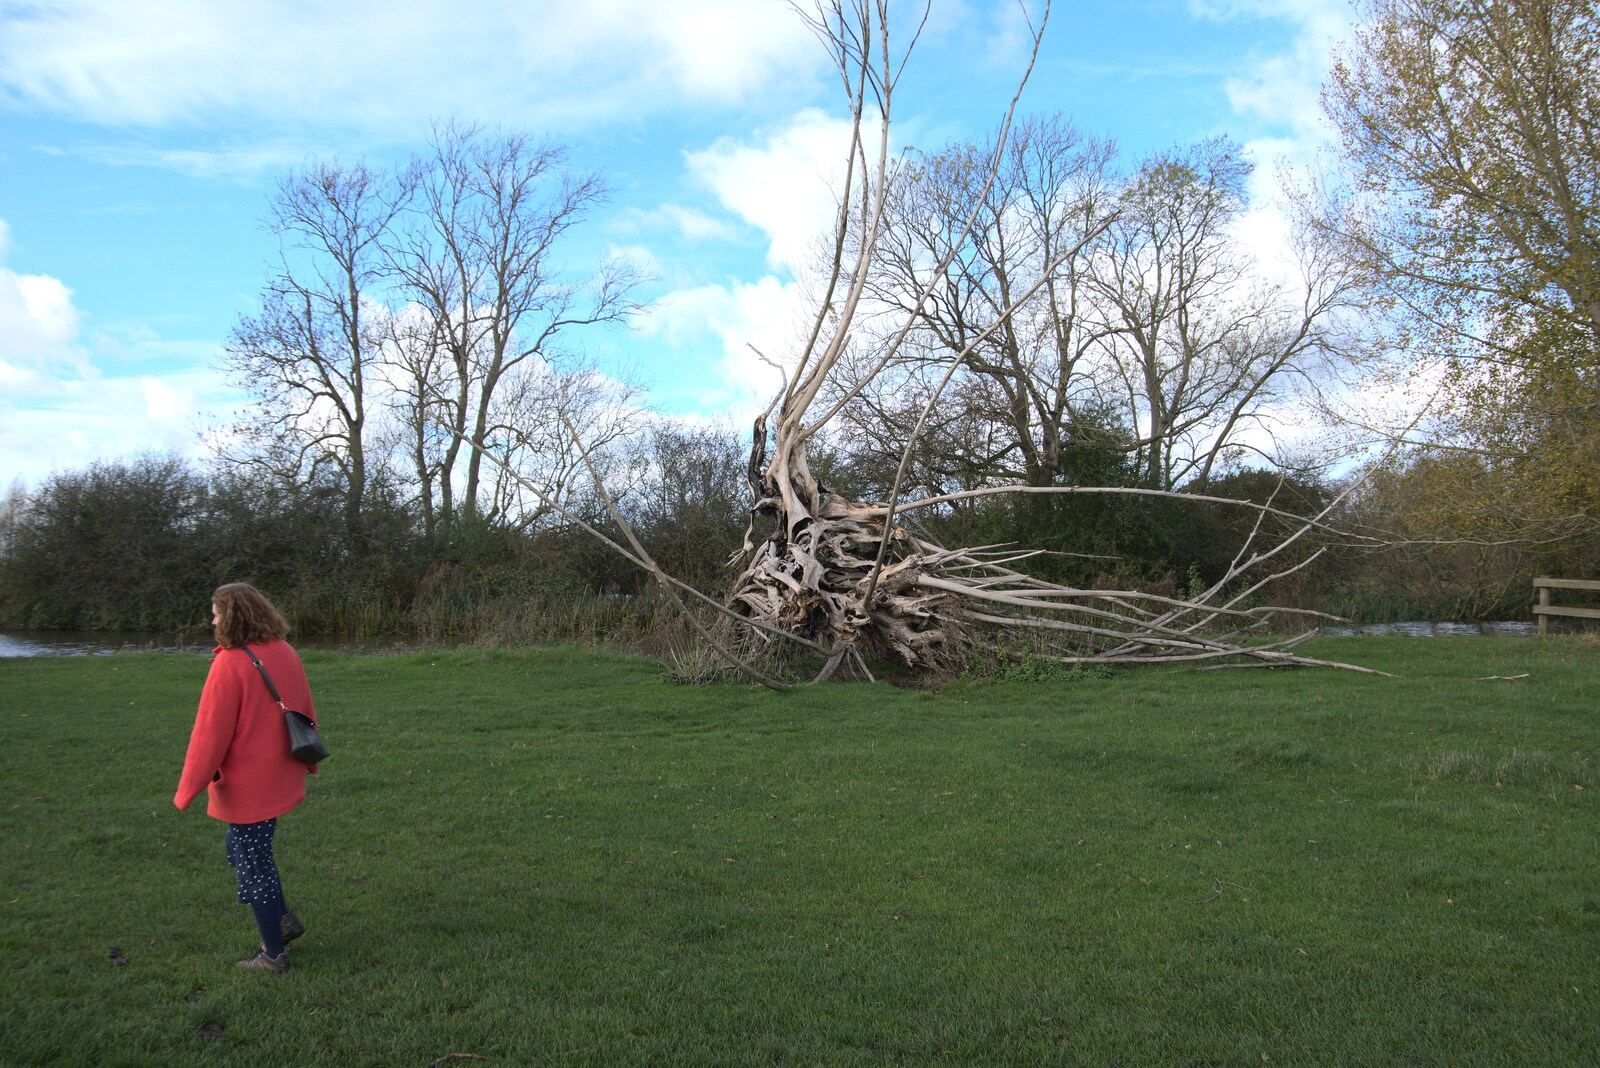 Isobel roams around near a tree skeleton from A Postcard from Flatford and Dedham, Suffolk and Essex, 9th November 2022